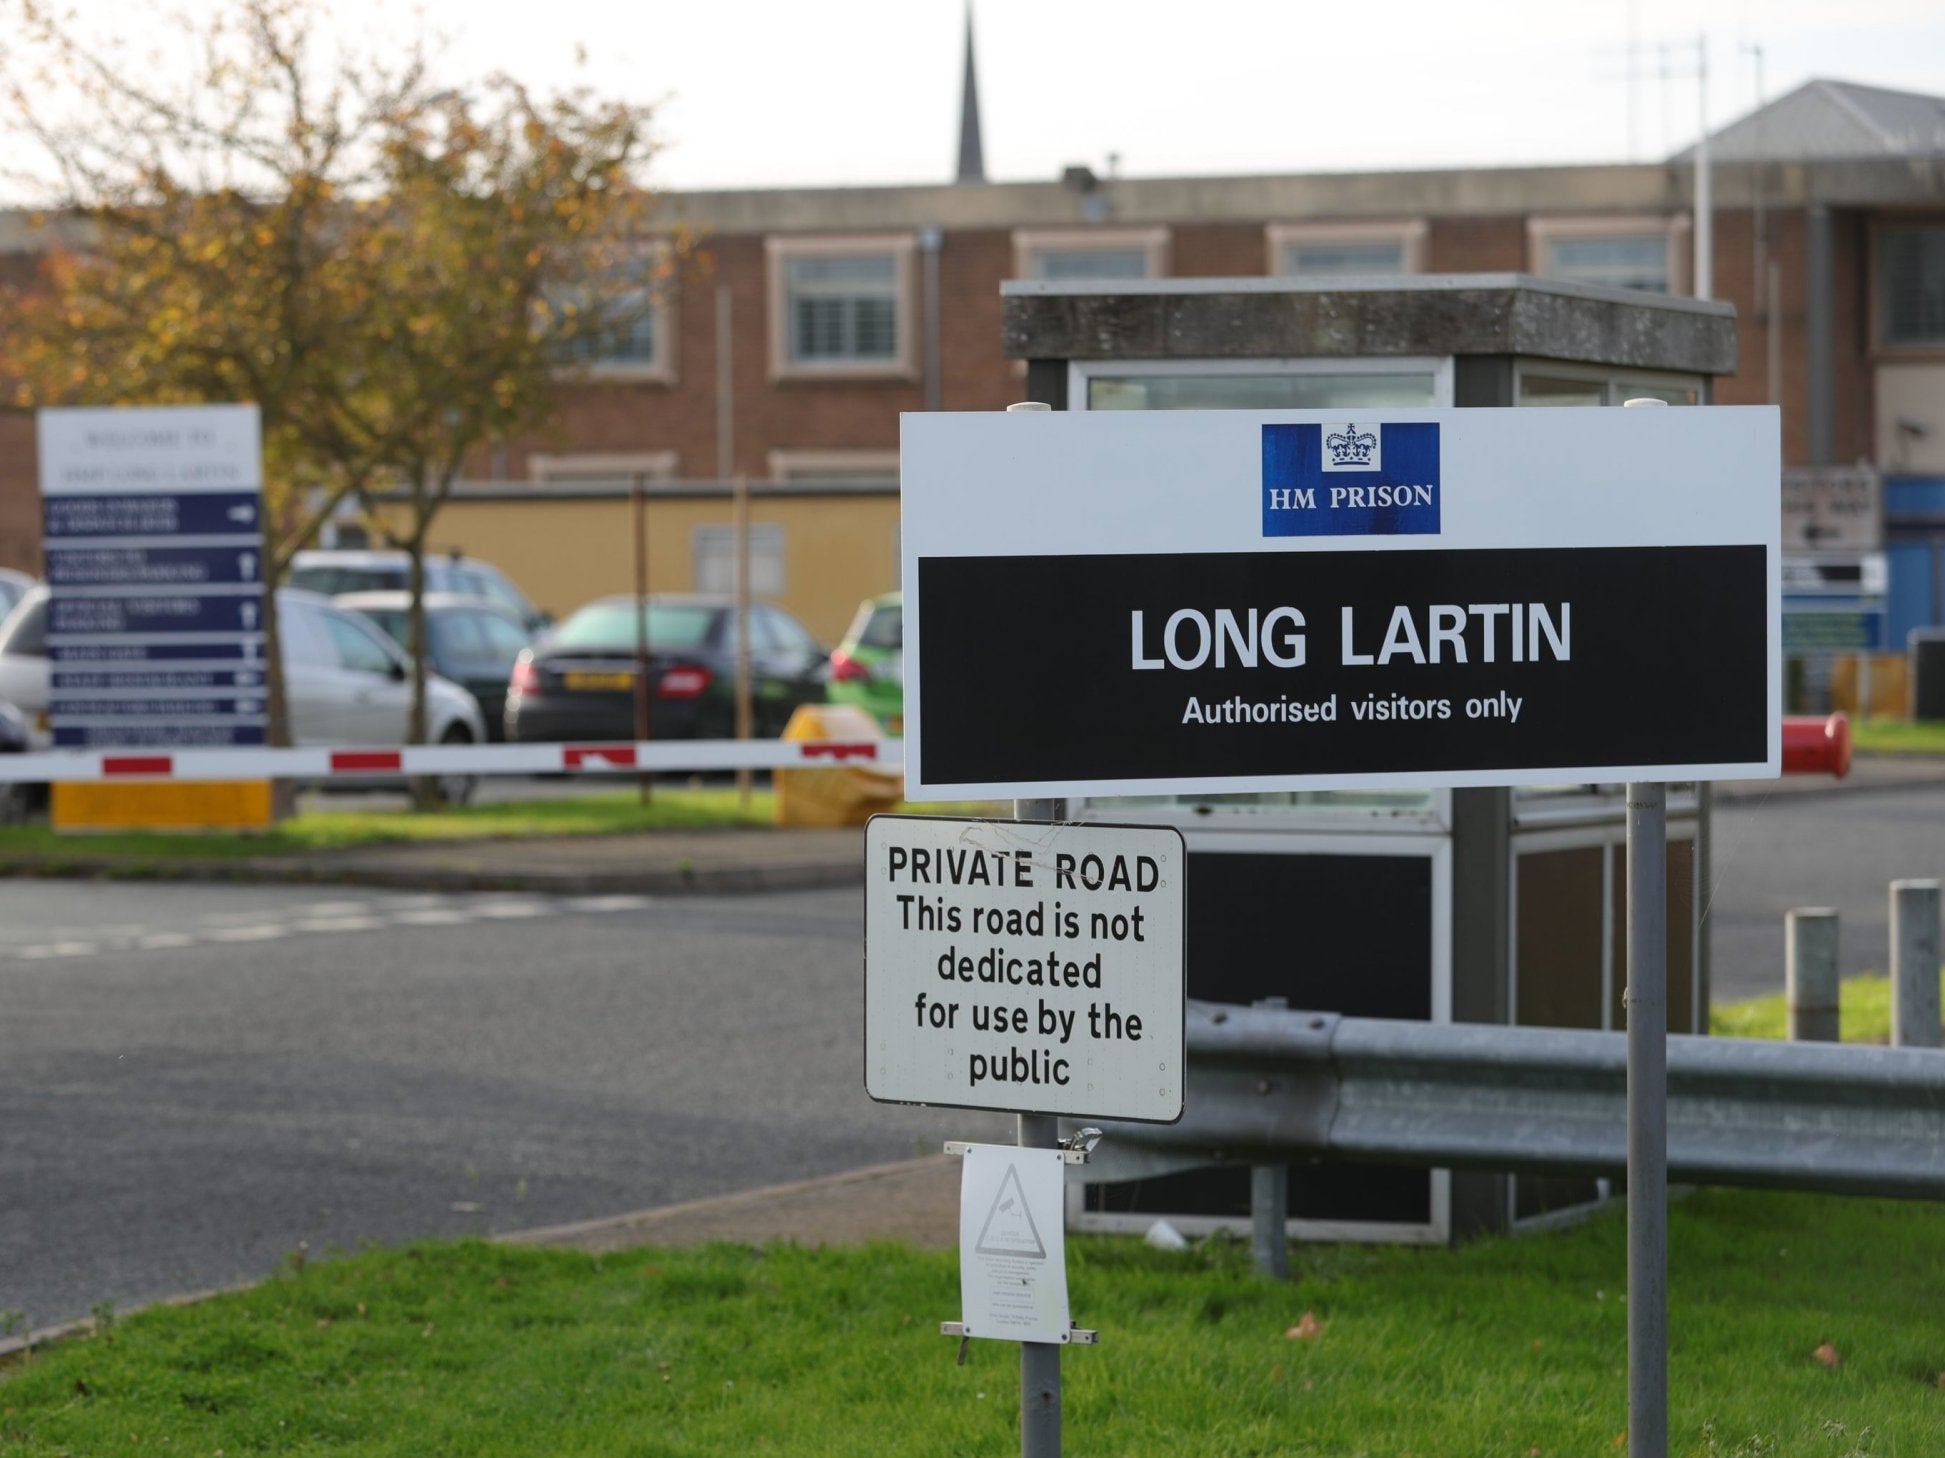 Long Lartin holds some 510 prisoners with more than three-quarters of inmates serving life sentences